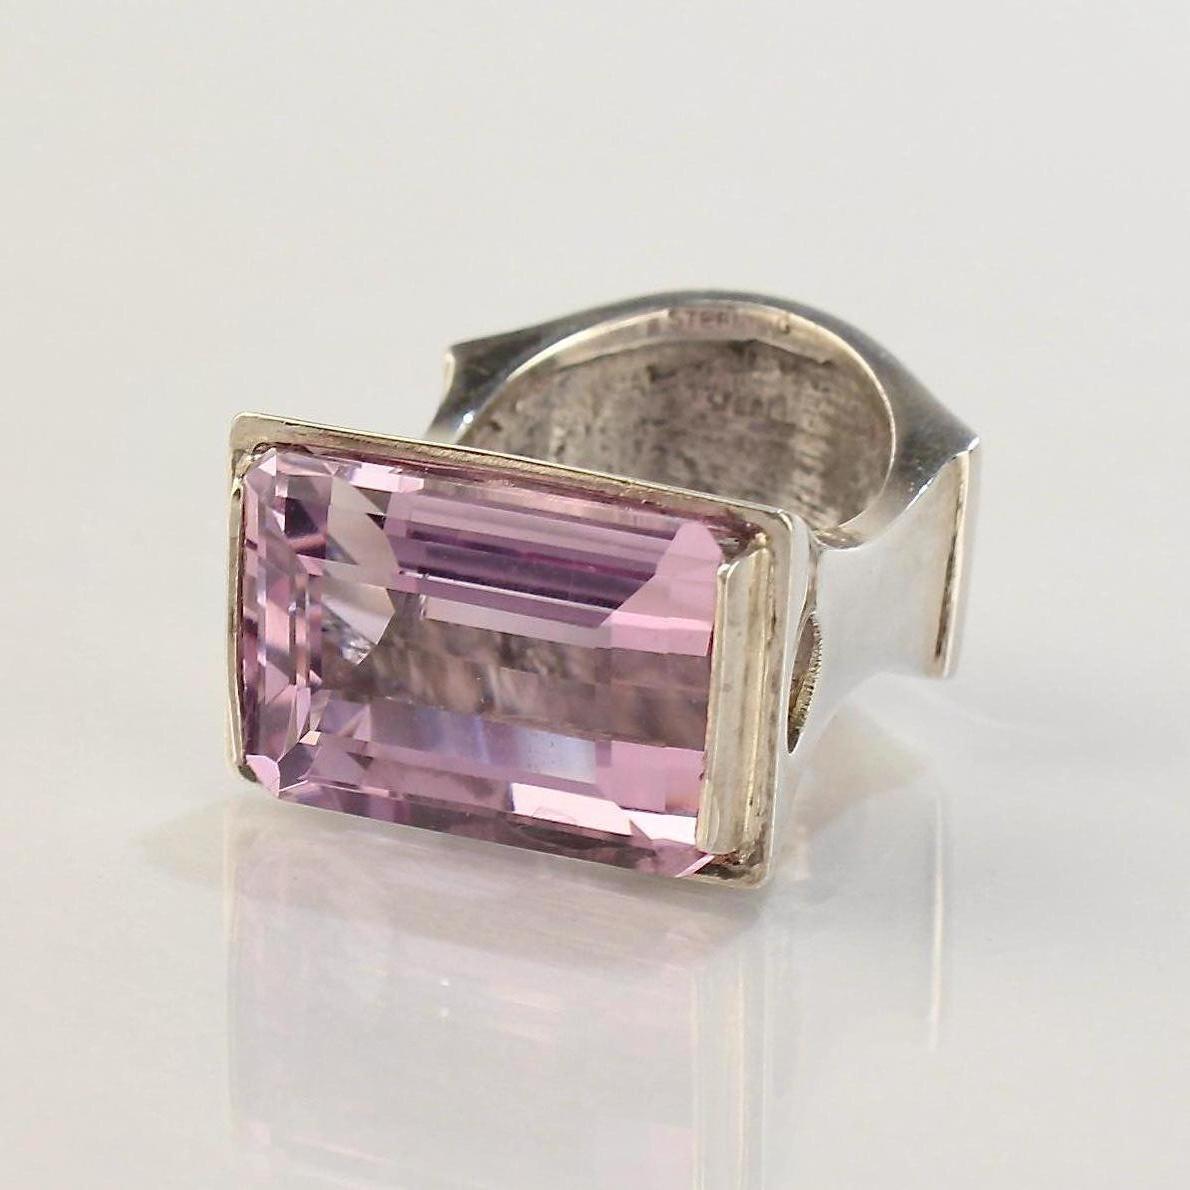 An impressive, signed Wesley Emmons ring.

Emmons was an important jewelry maker in Philadelphia during the middle of the 20th century. He created cutting-edge jewelry for decades, and his long client list included numerous prominent clients such as